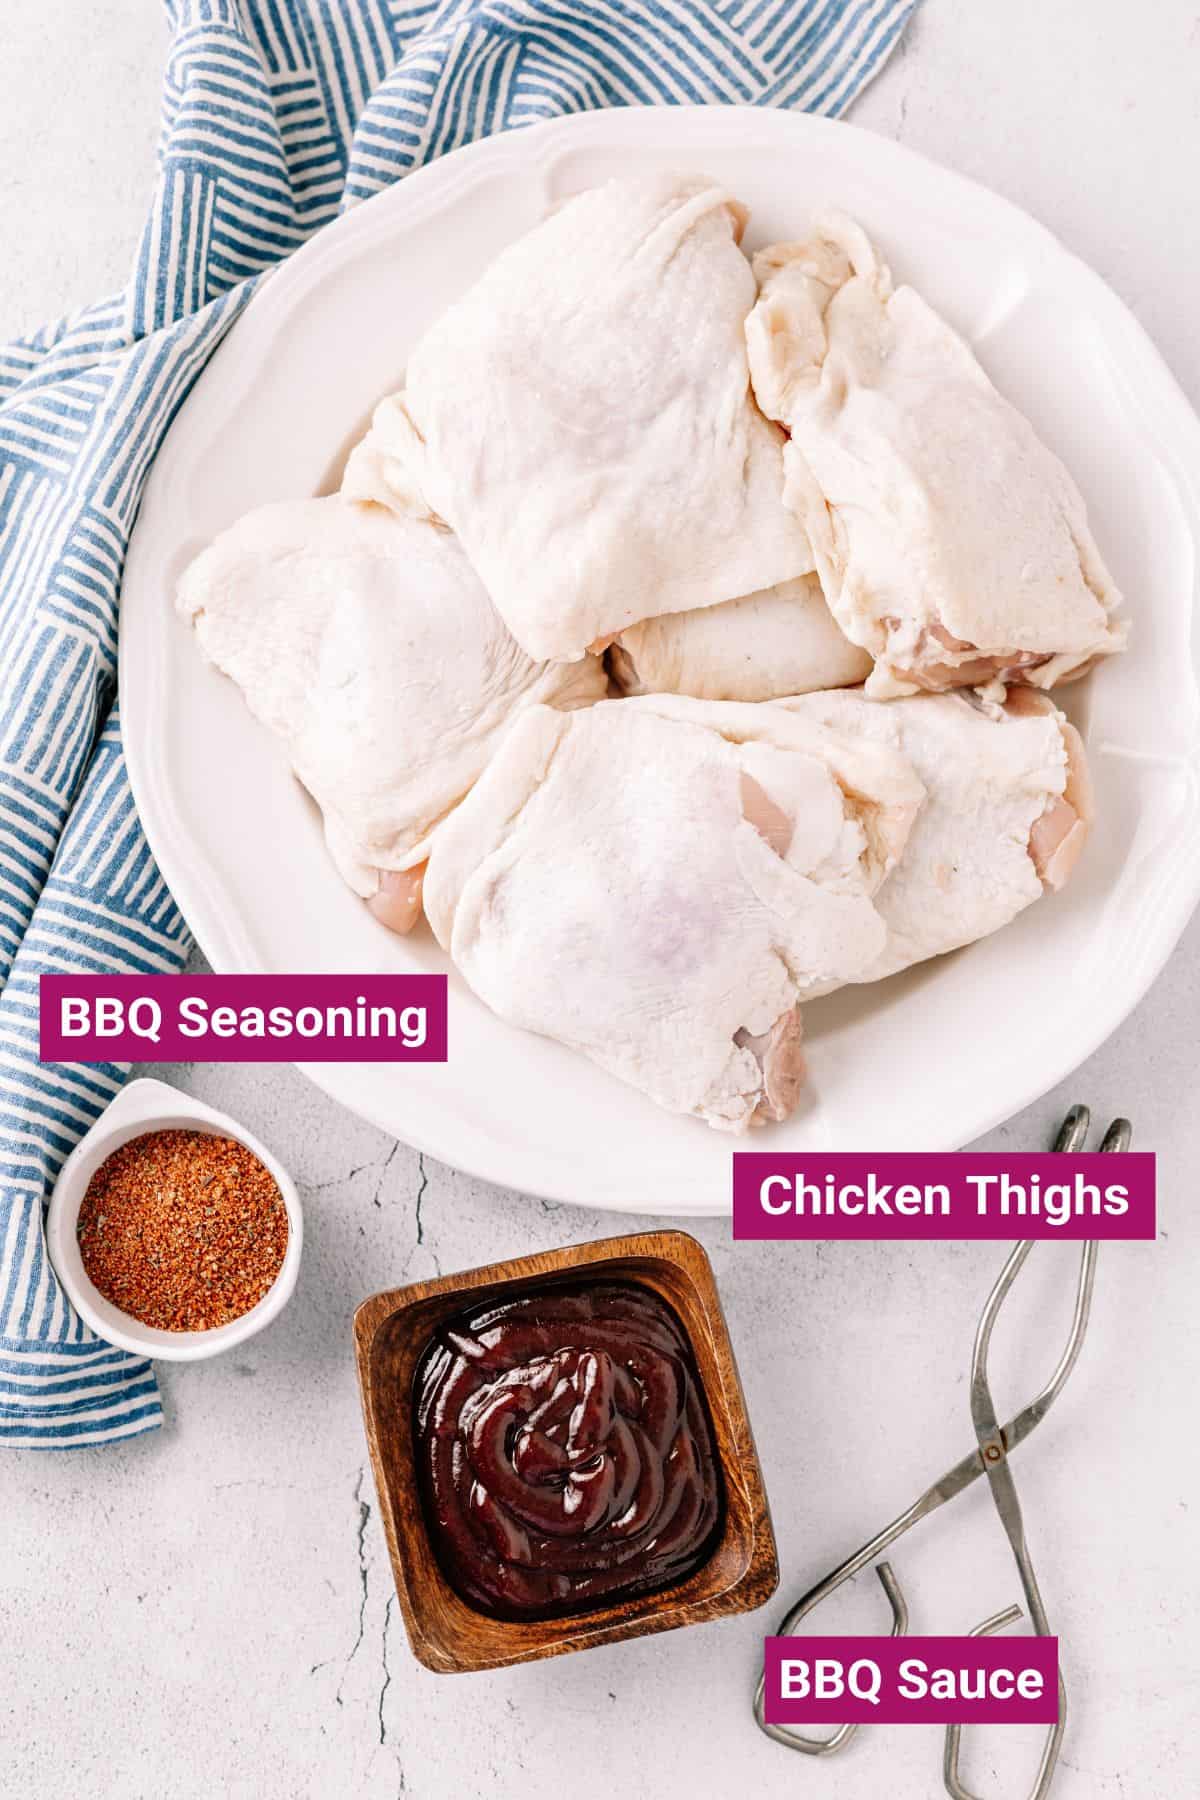 bbq seasoning, bbq sauce on separate containers and a few pieces of chicken thighs on a plate